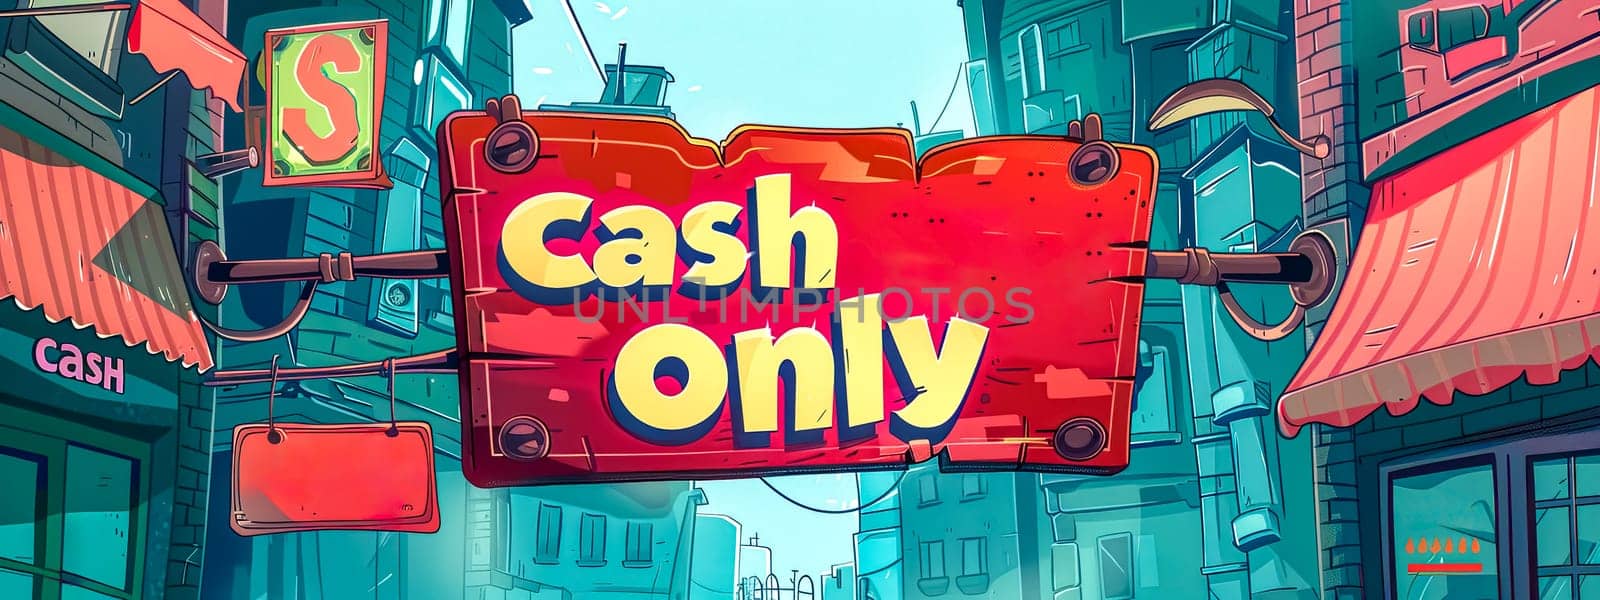 Vintage cash only sign in colorful cartoon street by Edophoto